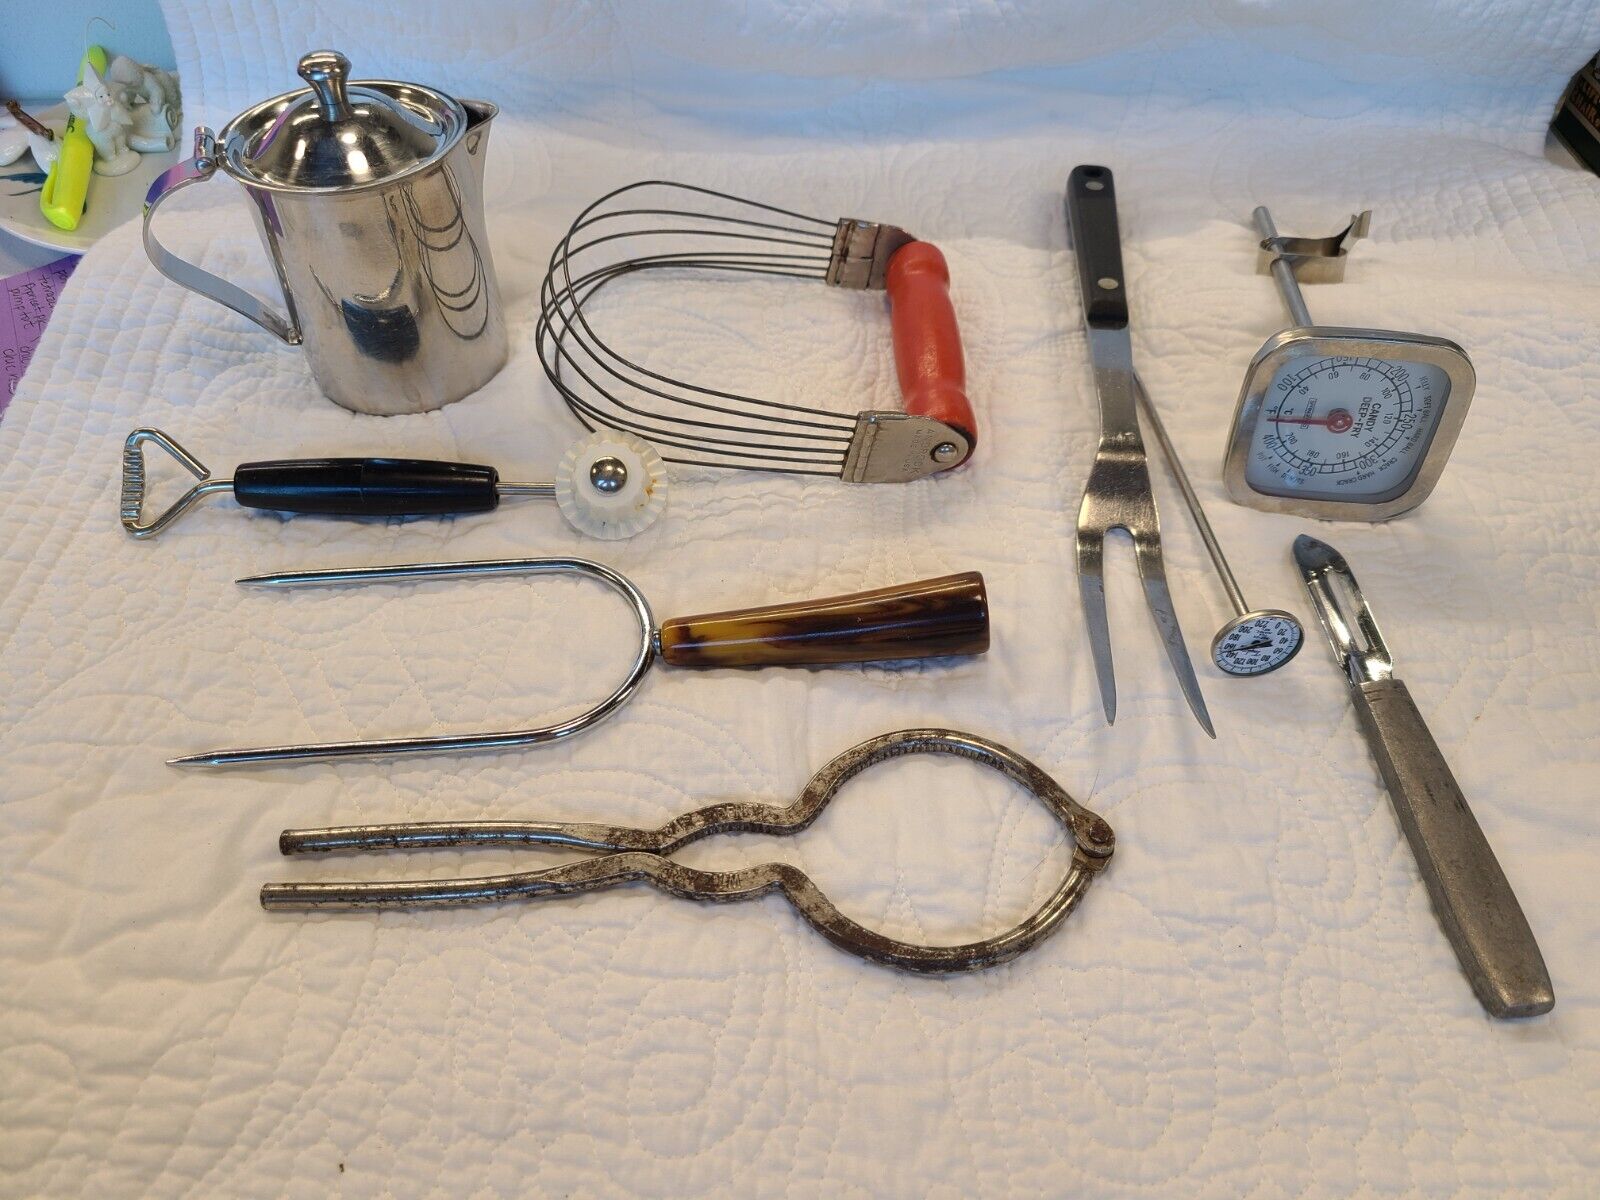 Lot of Vintage Kitchen Utensils Gadgets Assorted Bakelite Androck candy therm